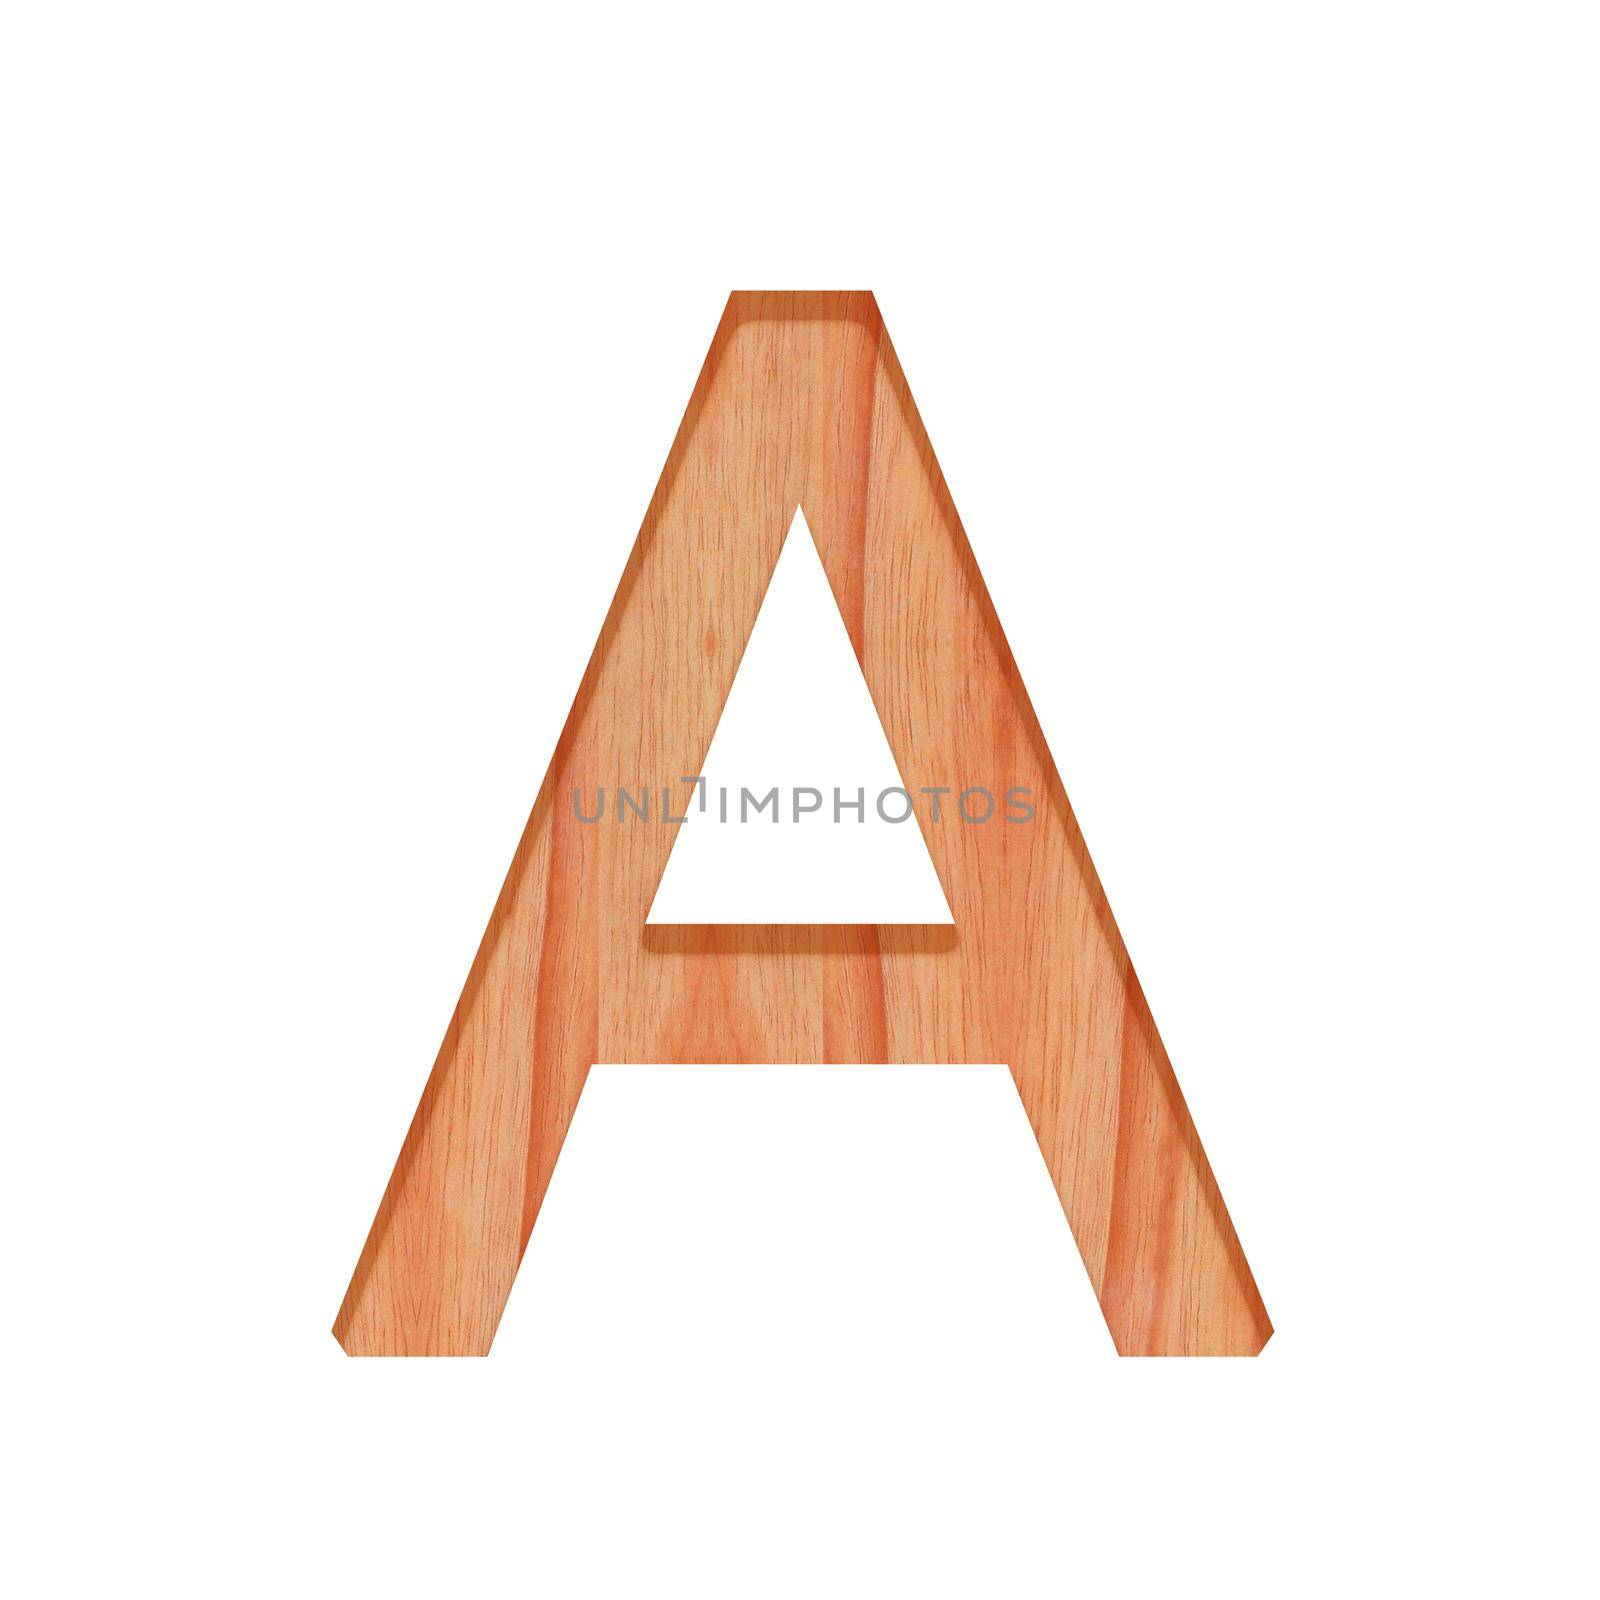 wooden vintage alphabet letter pattern beautiful 3d isolated on white background, capital letter A